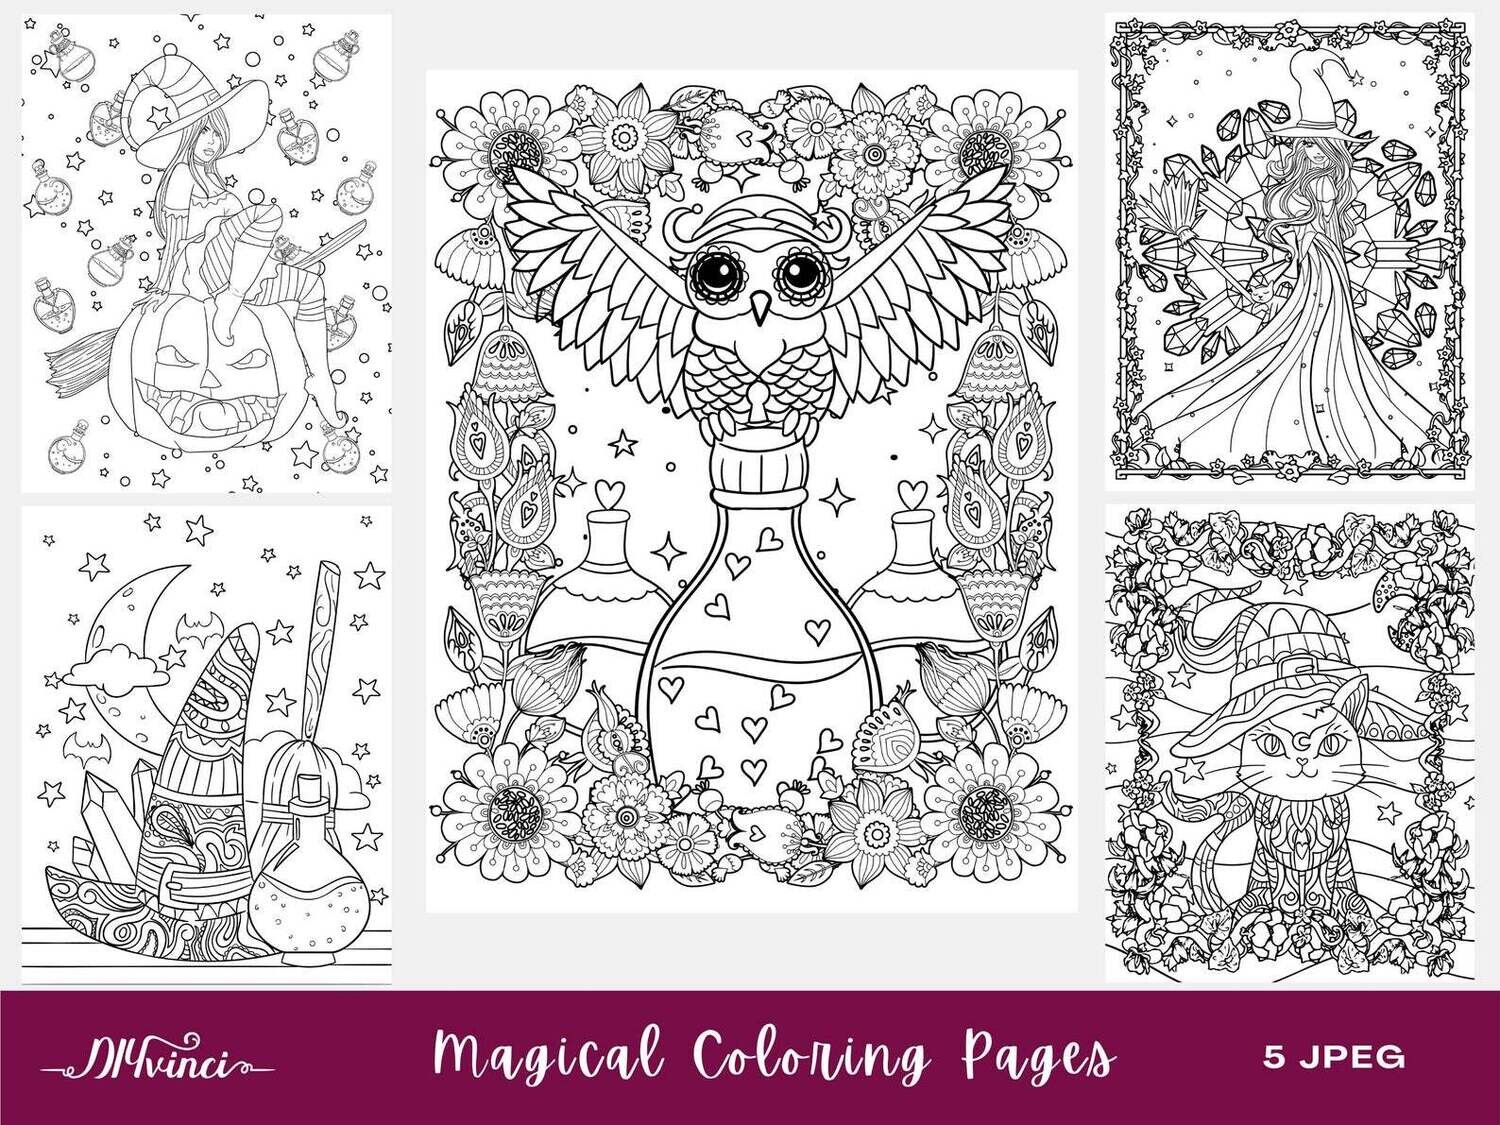 Printable Magical/Witch Coloring Pages - 5 JPEG - Personal & Commercial Use